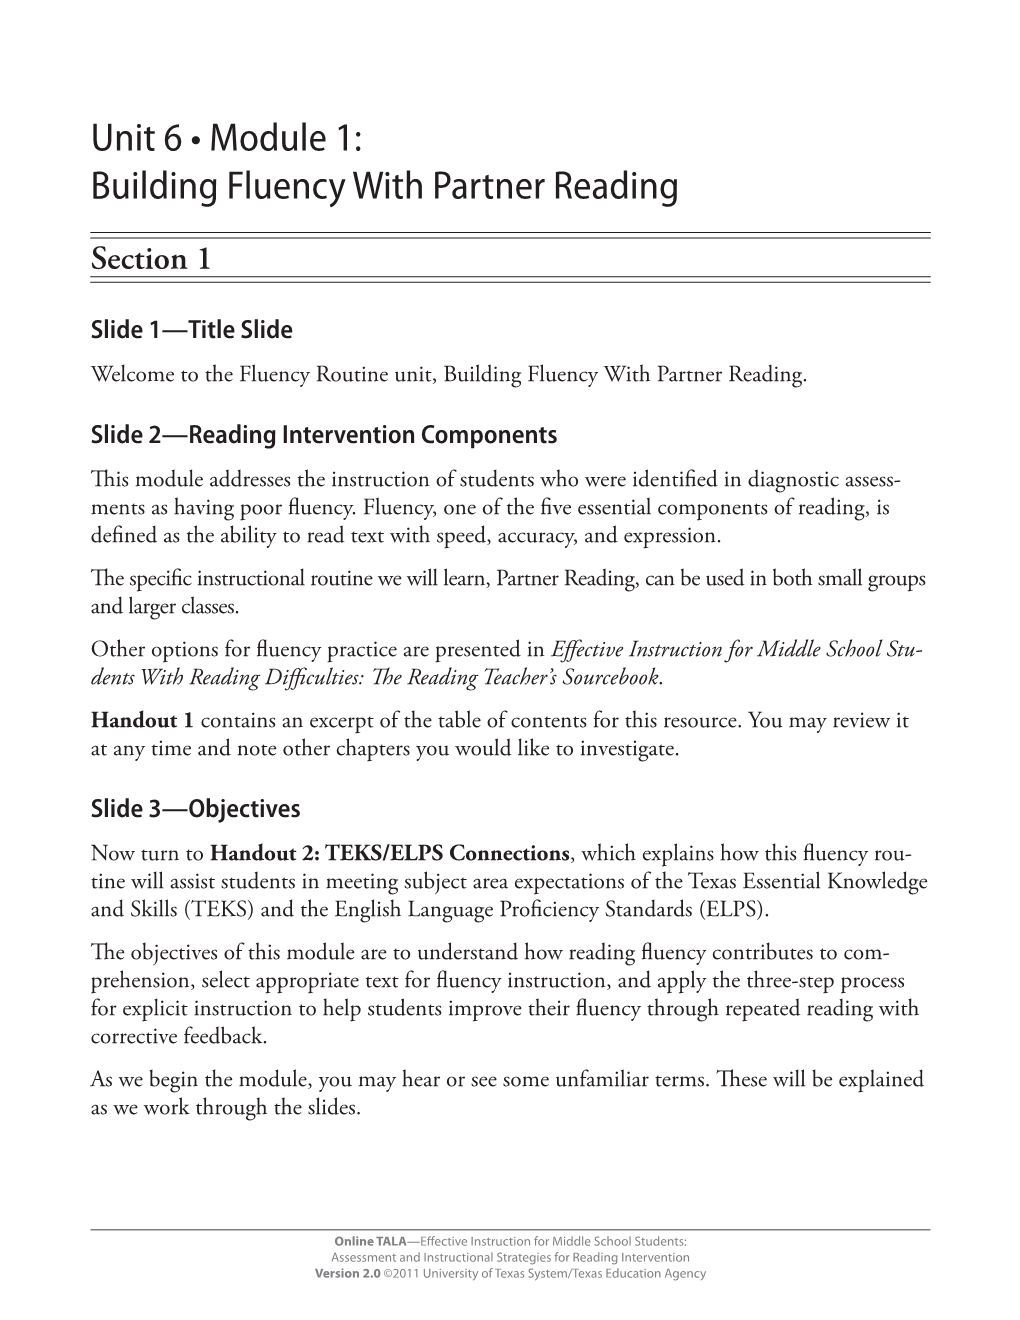 Building Fluency with Partner Reading